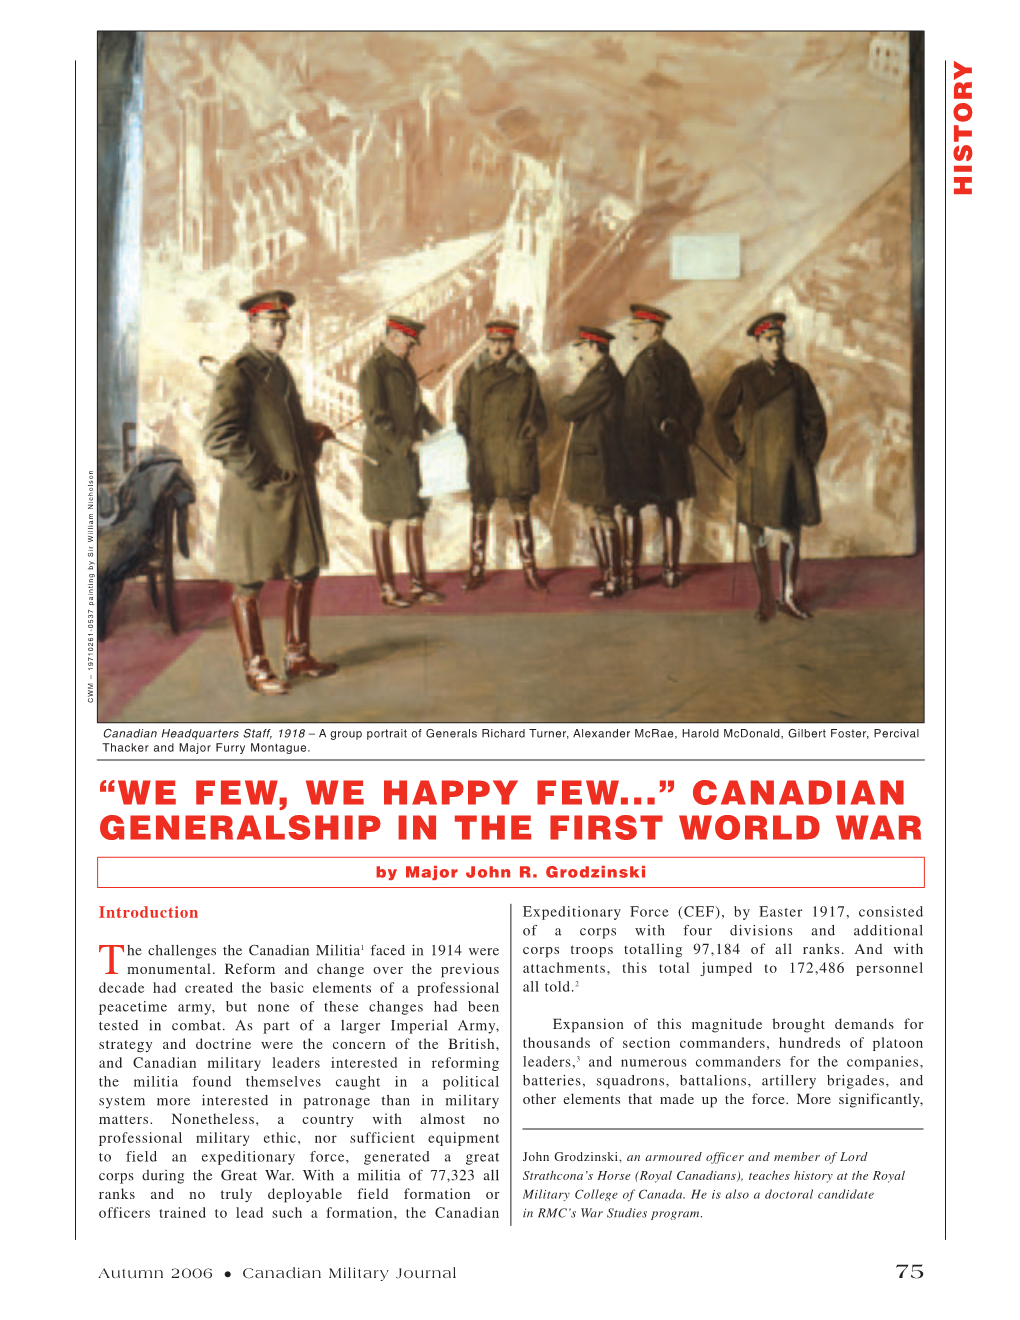 Canadian Generalship in the First World War